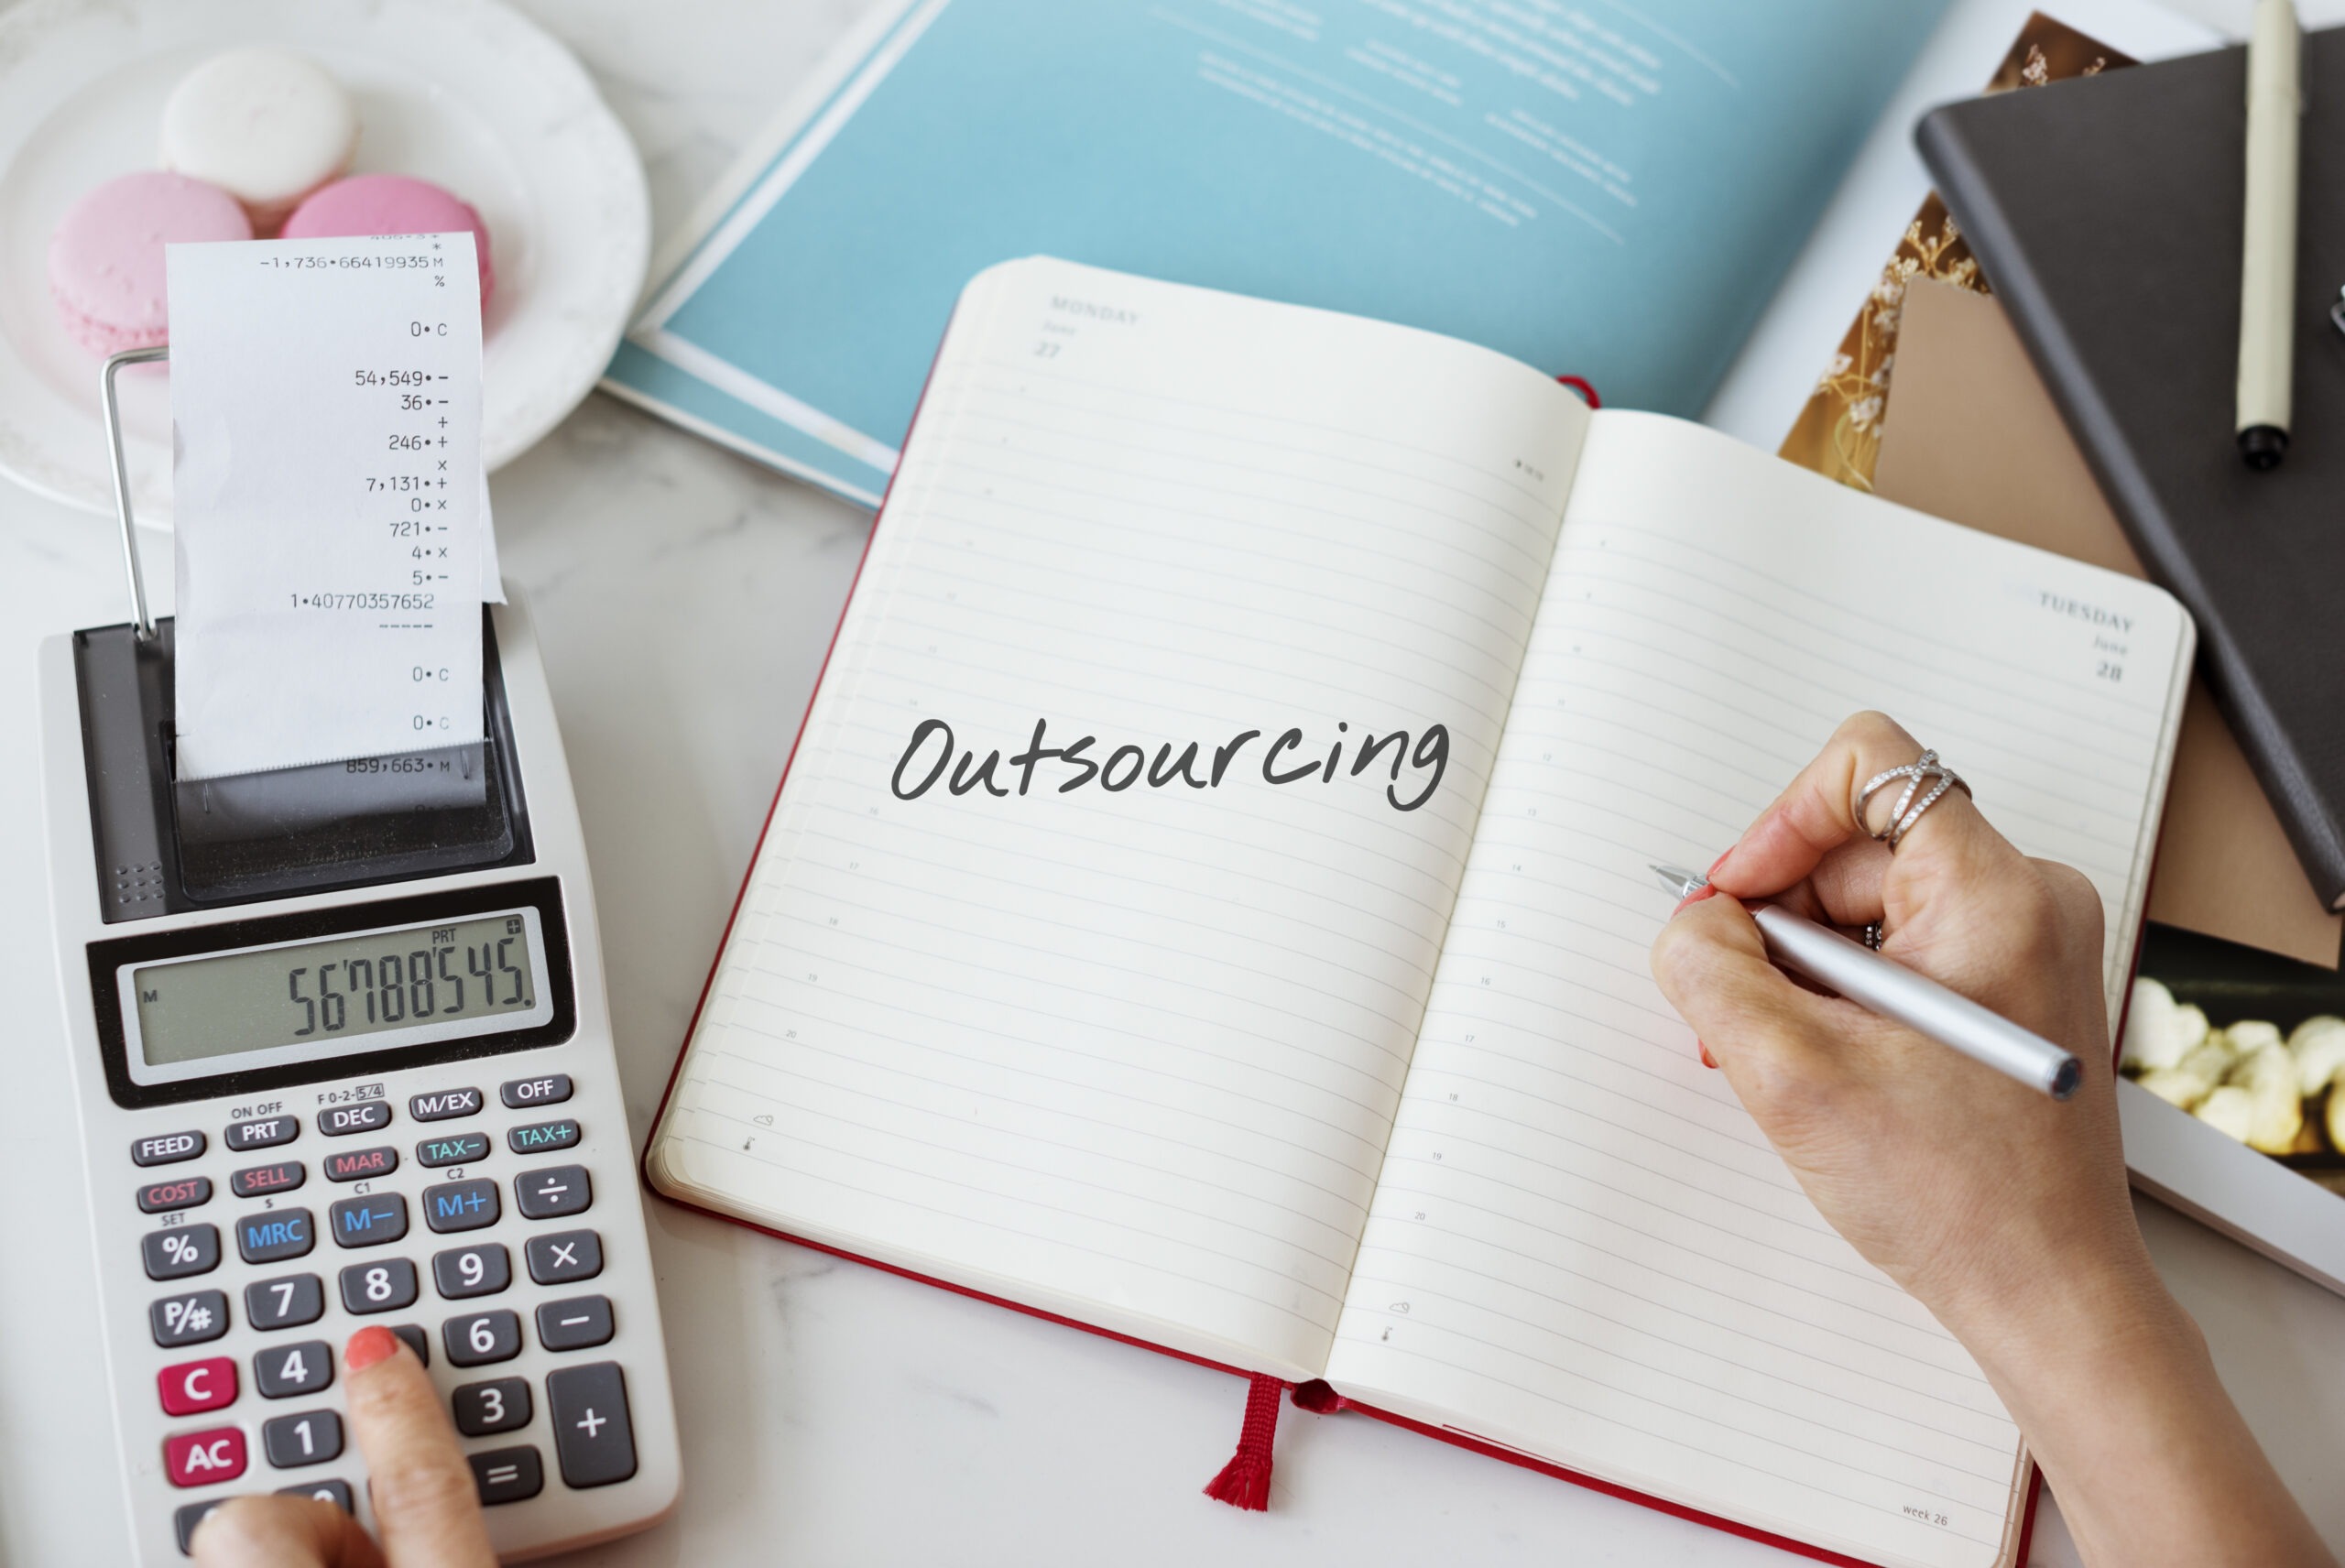 A person writing with a pen on a notebook that says, "outsourcing" on the other paper while using a calculator.